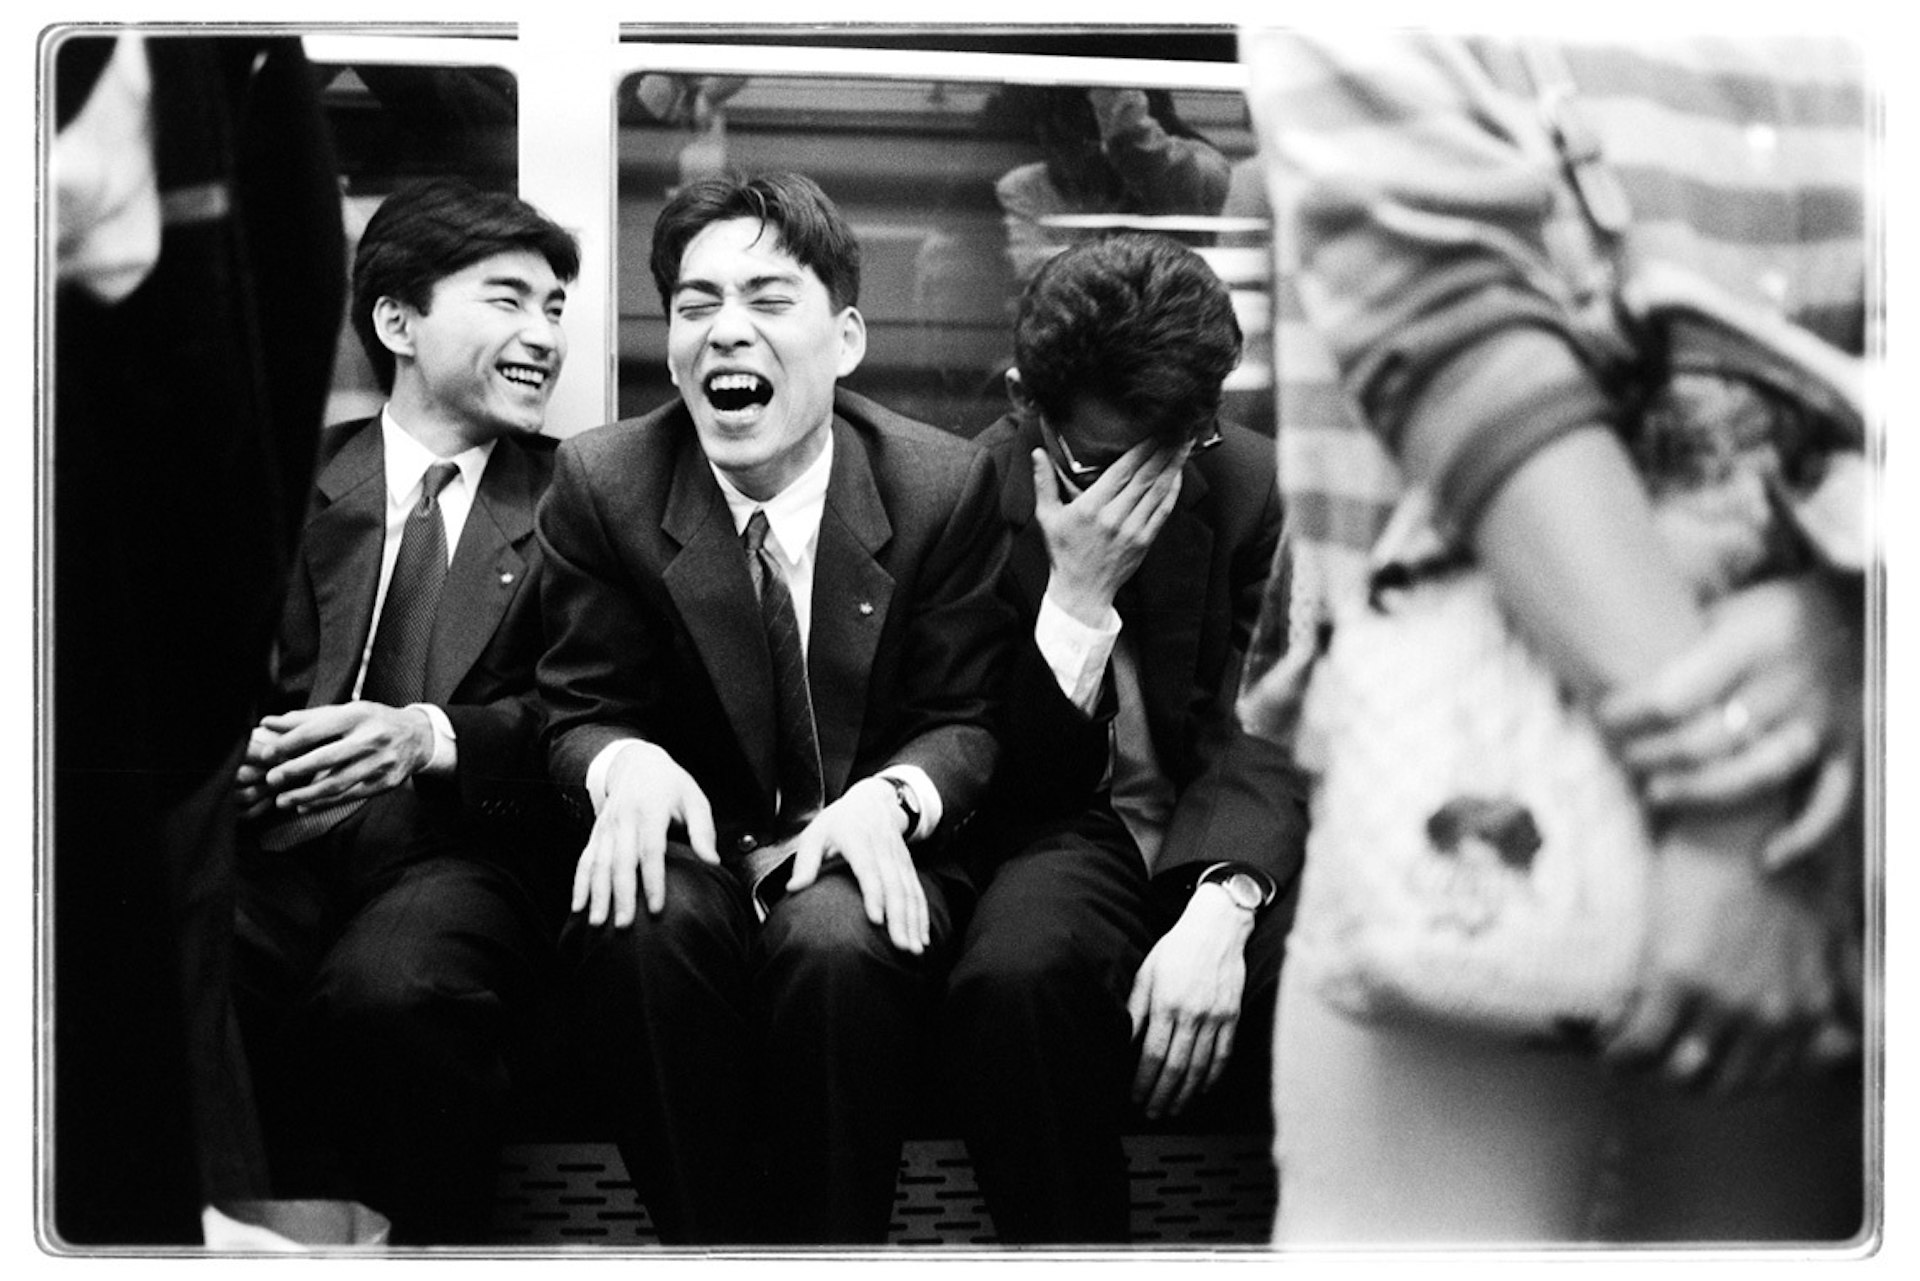 Documenting Tokyo’s subways in the 1980s